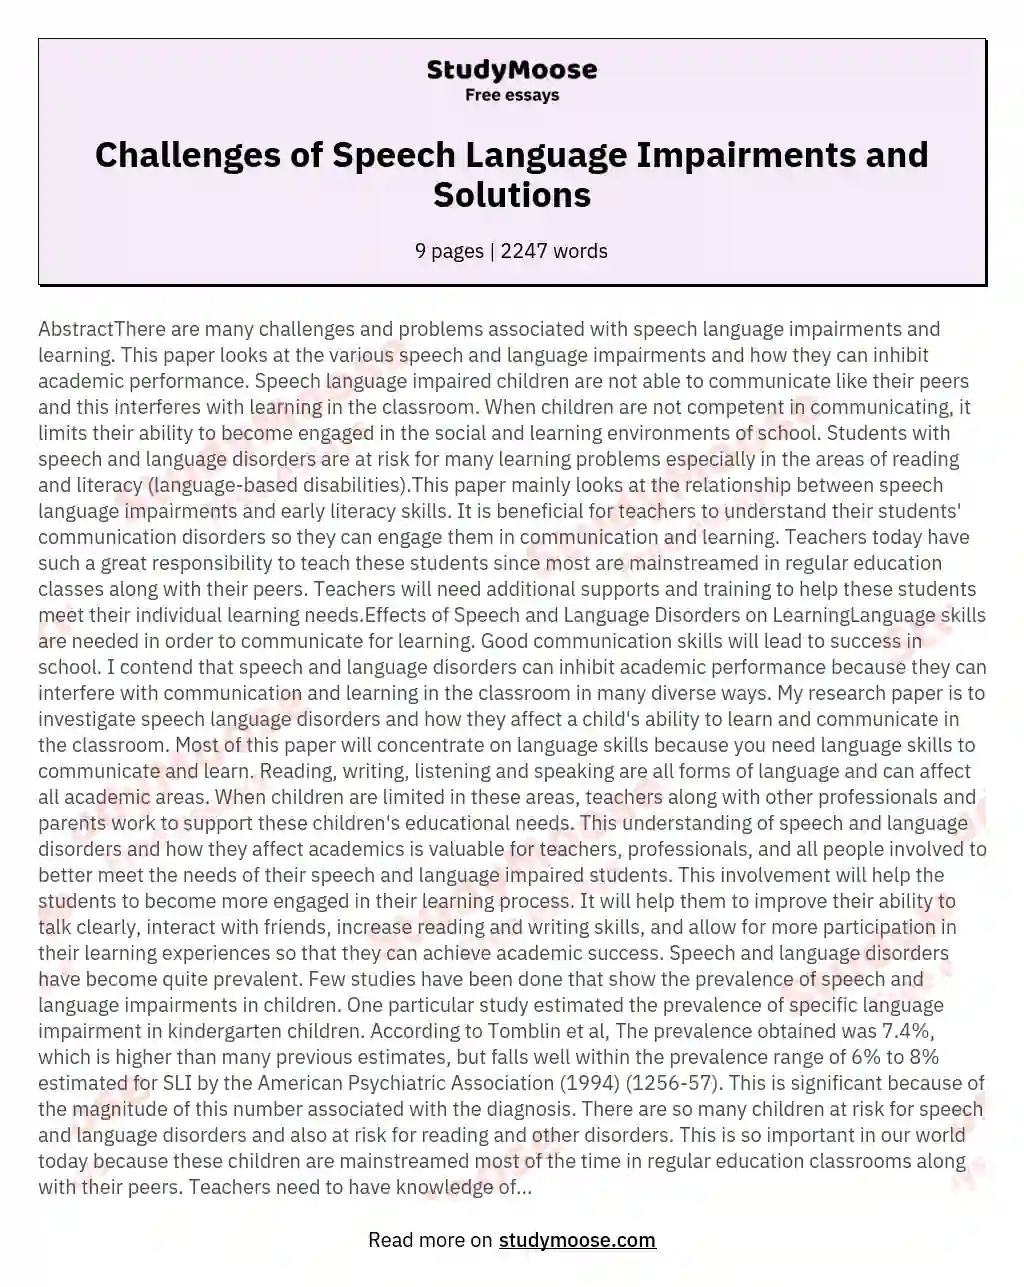 AbstractThere are many challenges and problems associated with speech language impairments and